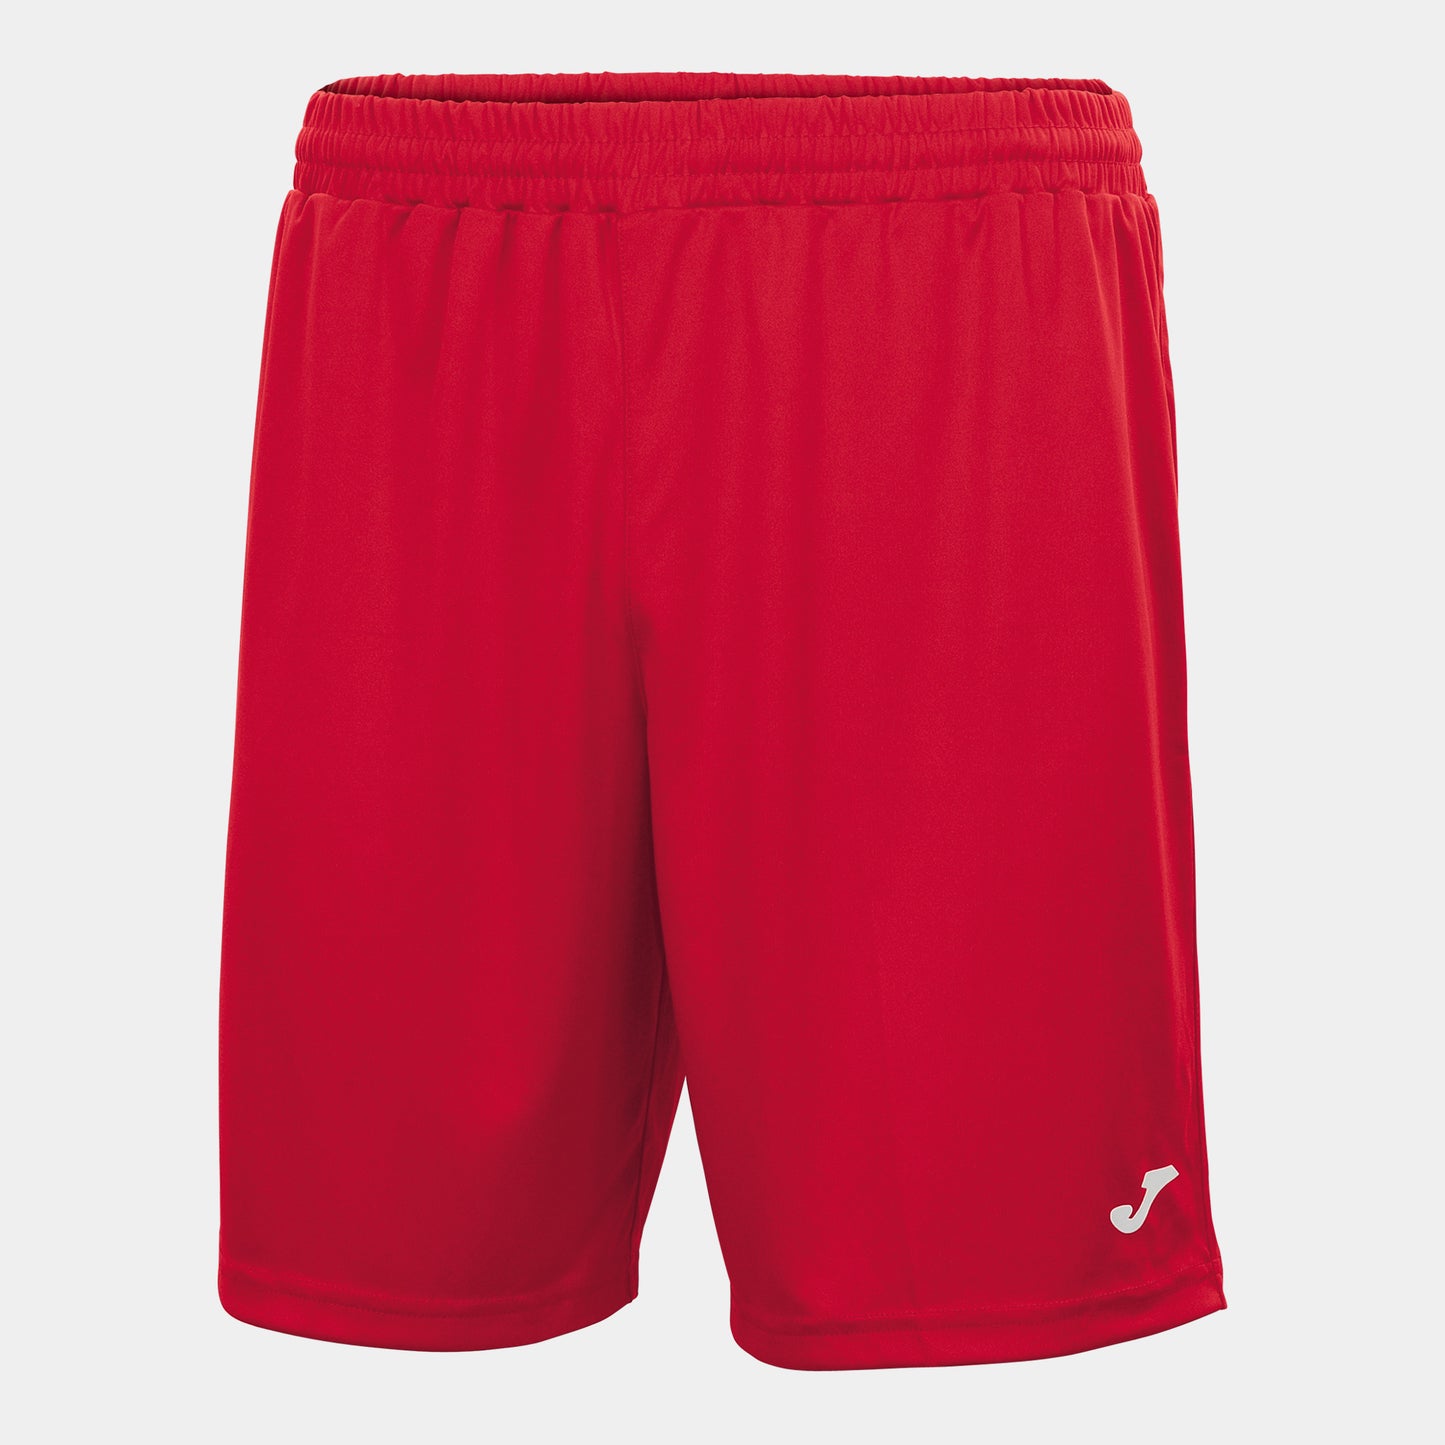 Grantham Town 3rd Kit Shorts - Red